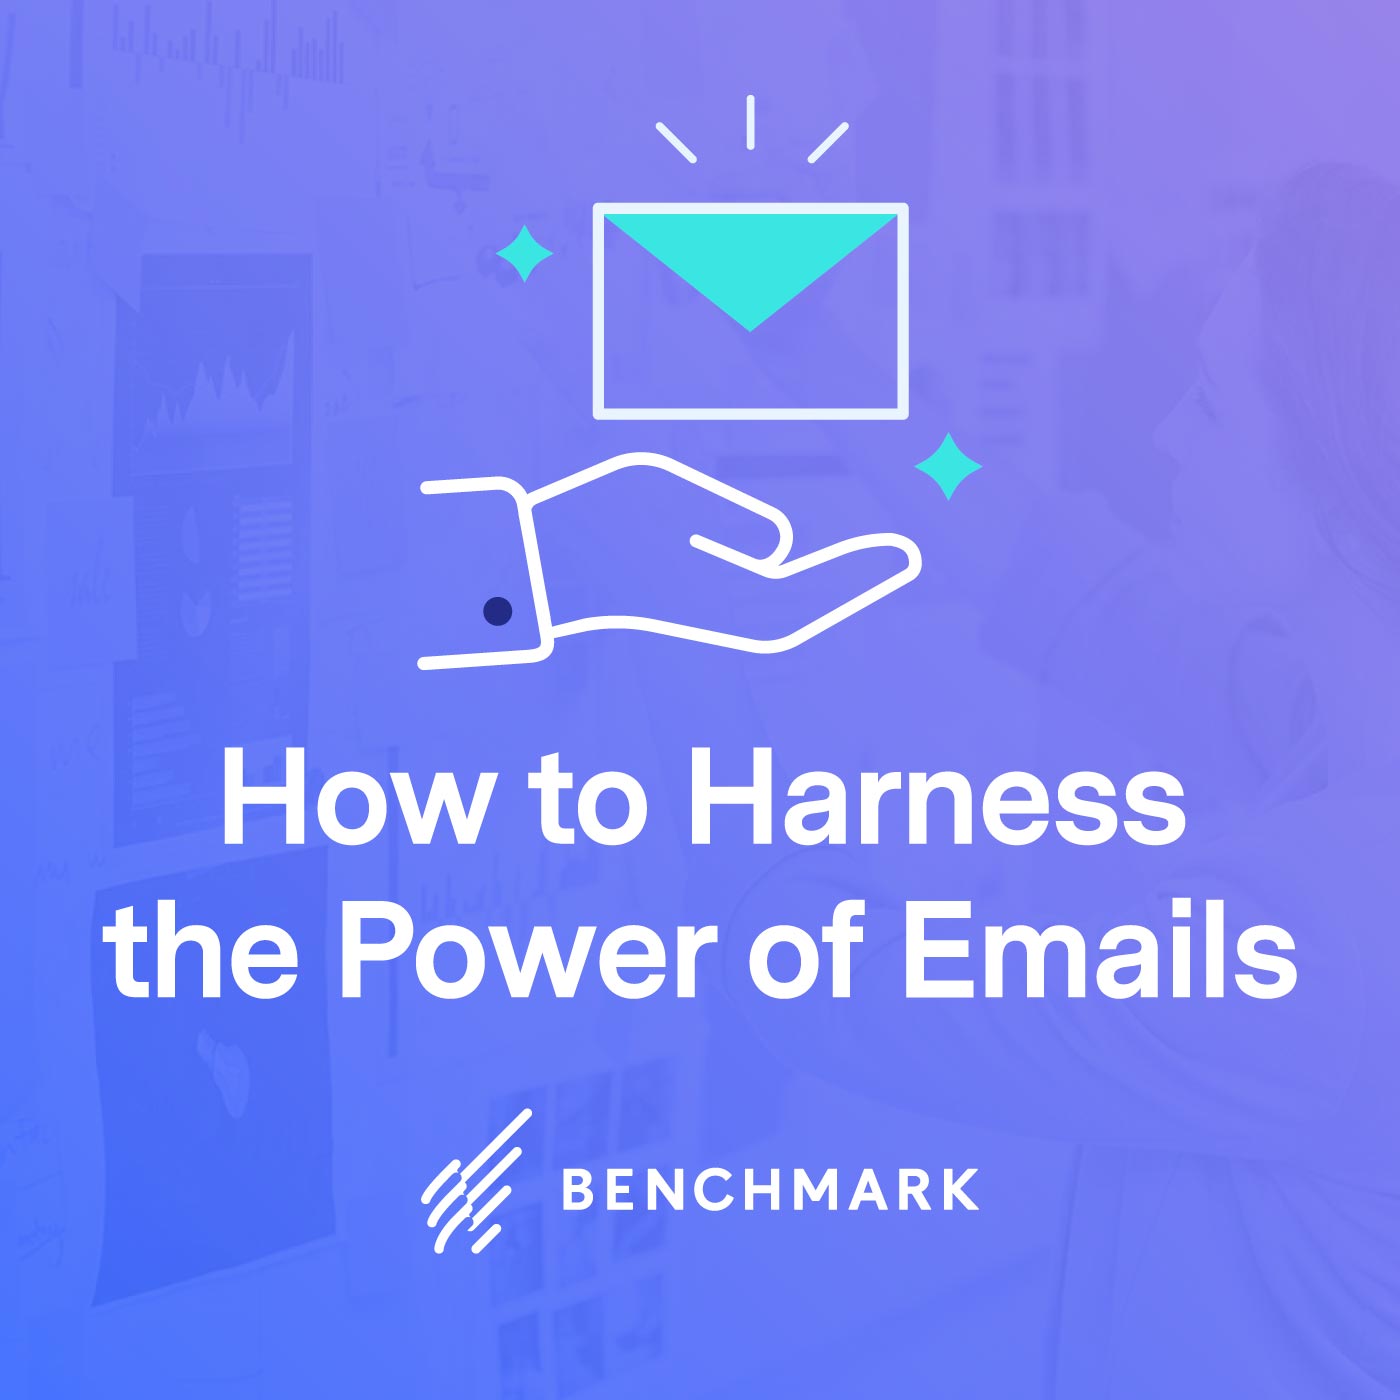 How to Harness the Power of Emails at Every Stage of Your Buyers' Journey